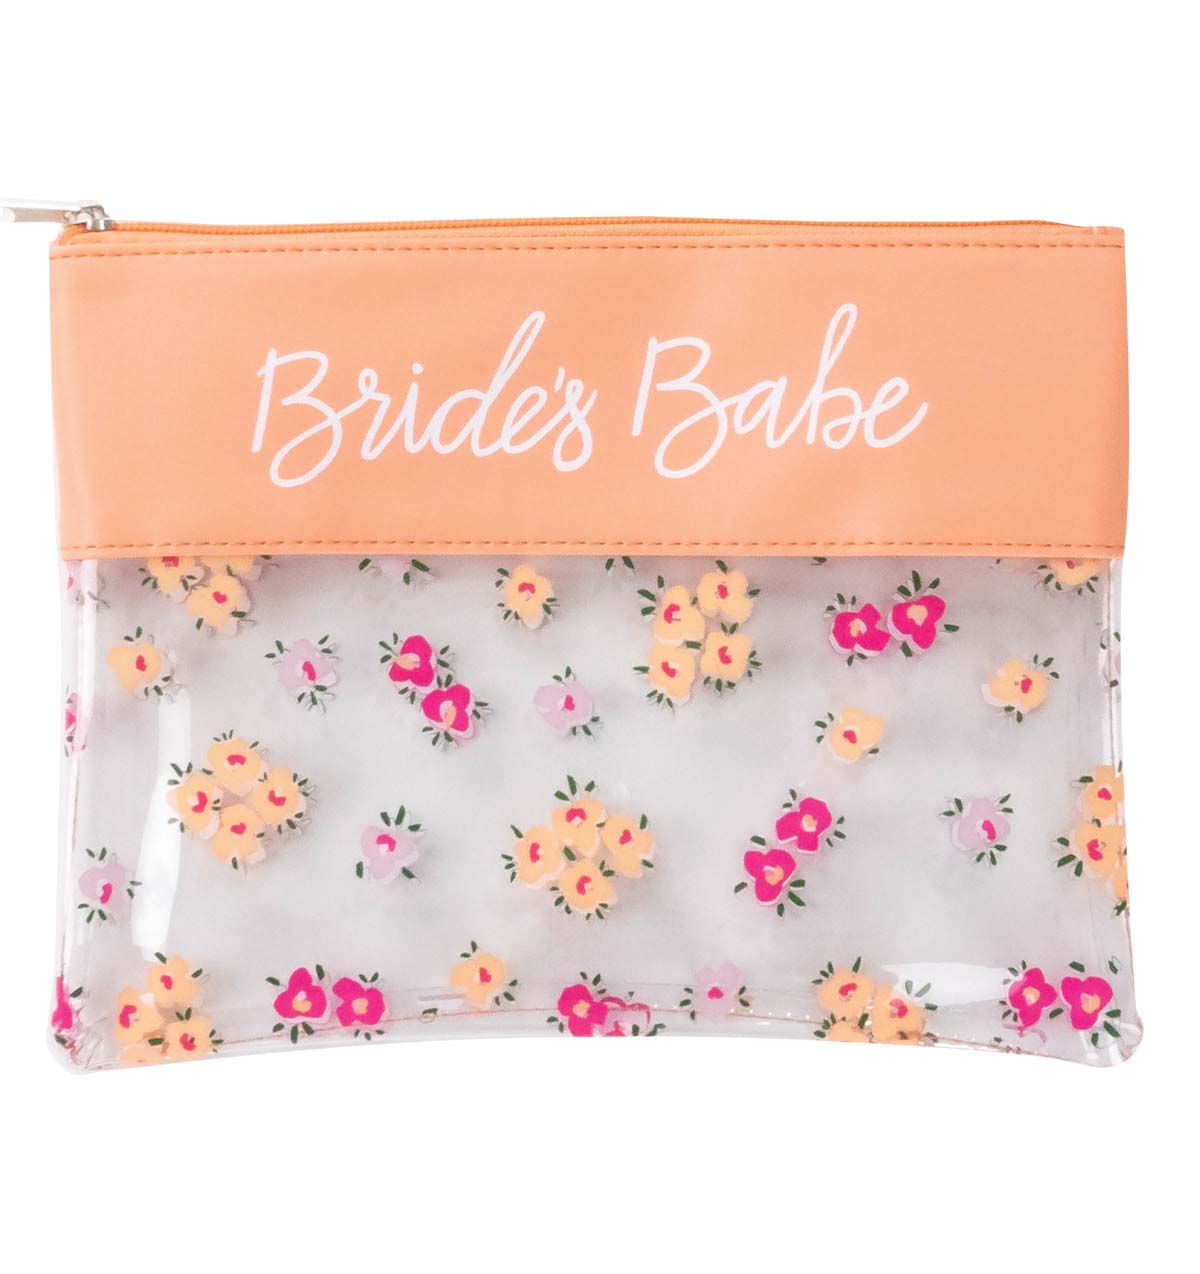 Bride’s Babe Cosmetic Case 
															/ About Face Designs							